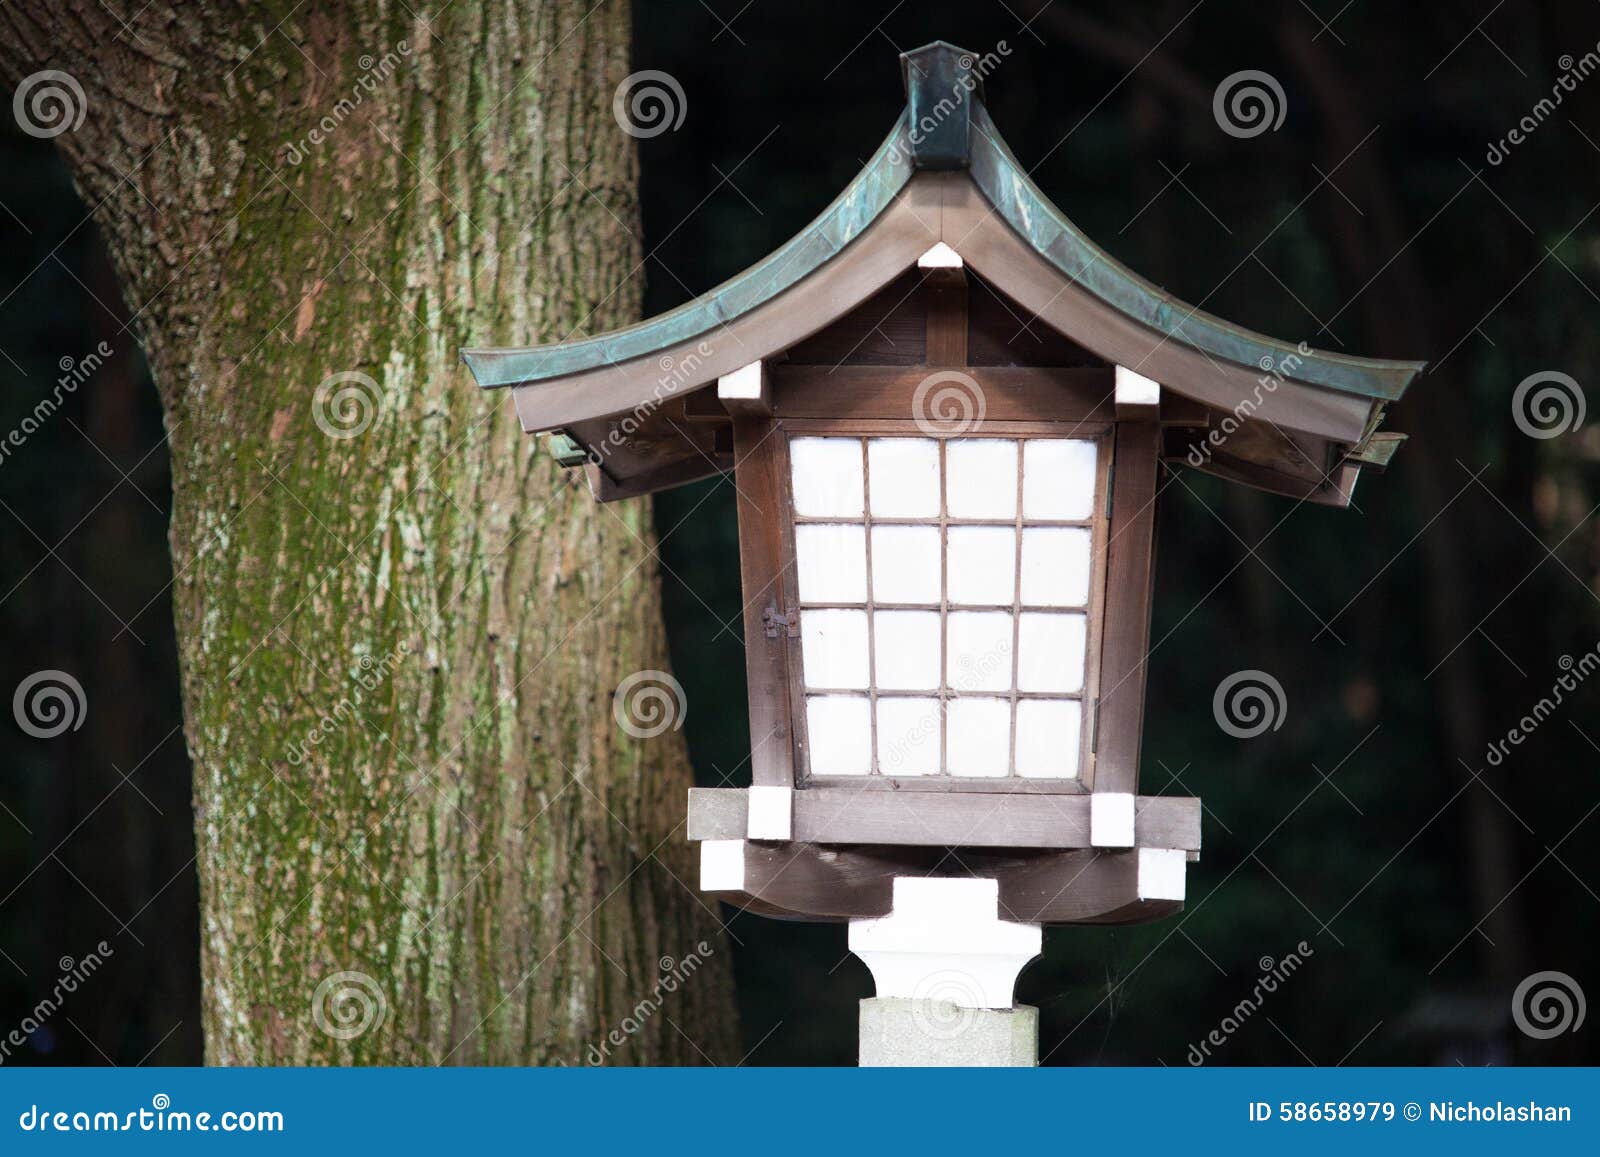 Lamp in temple ,Japan stock image. Image of japan, grass - 58658979